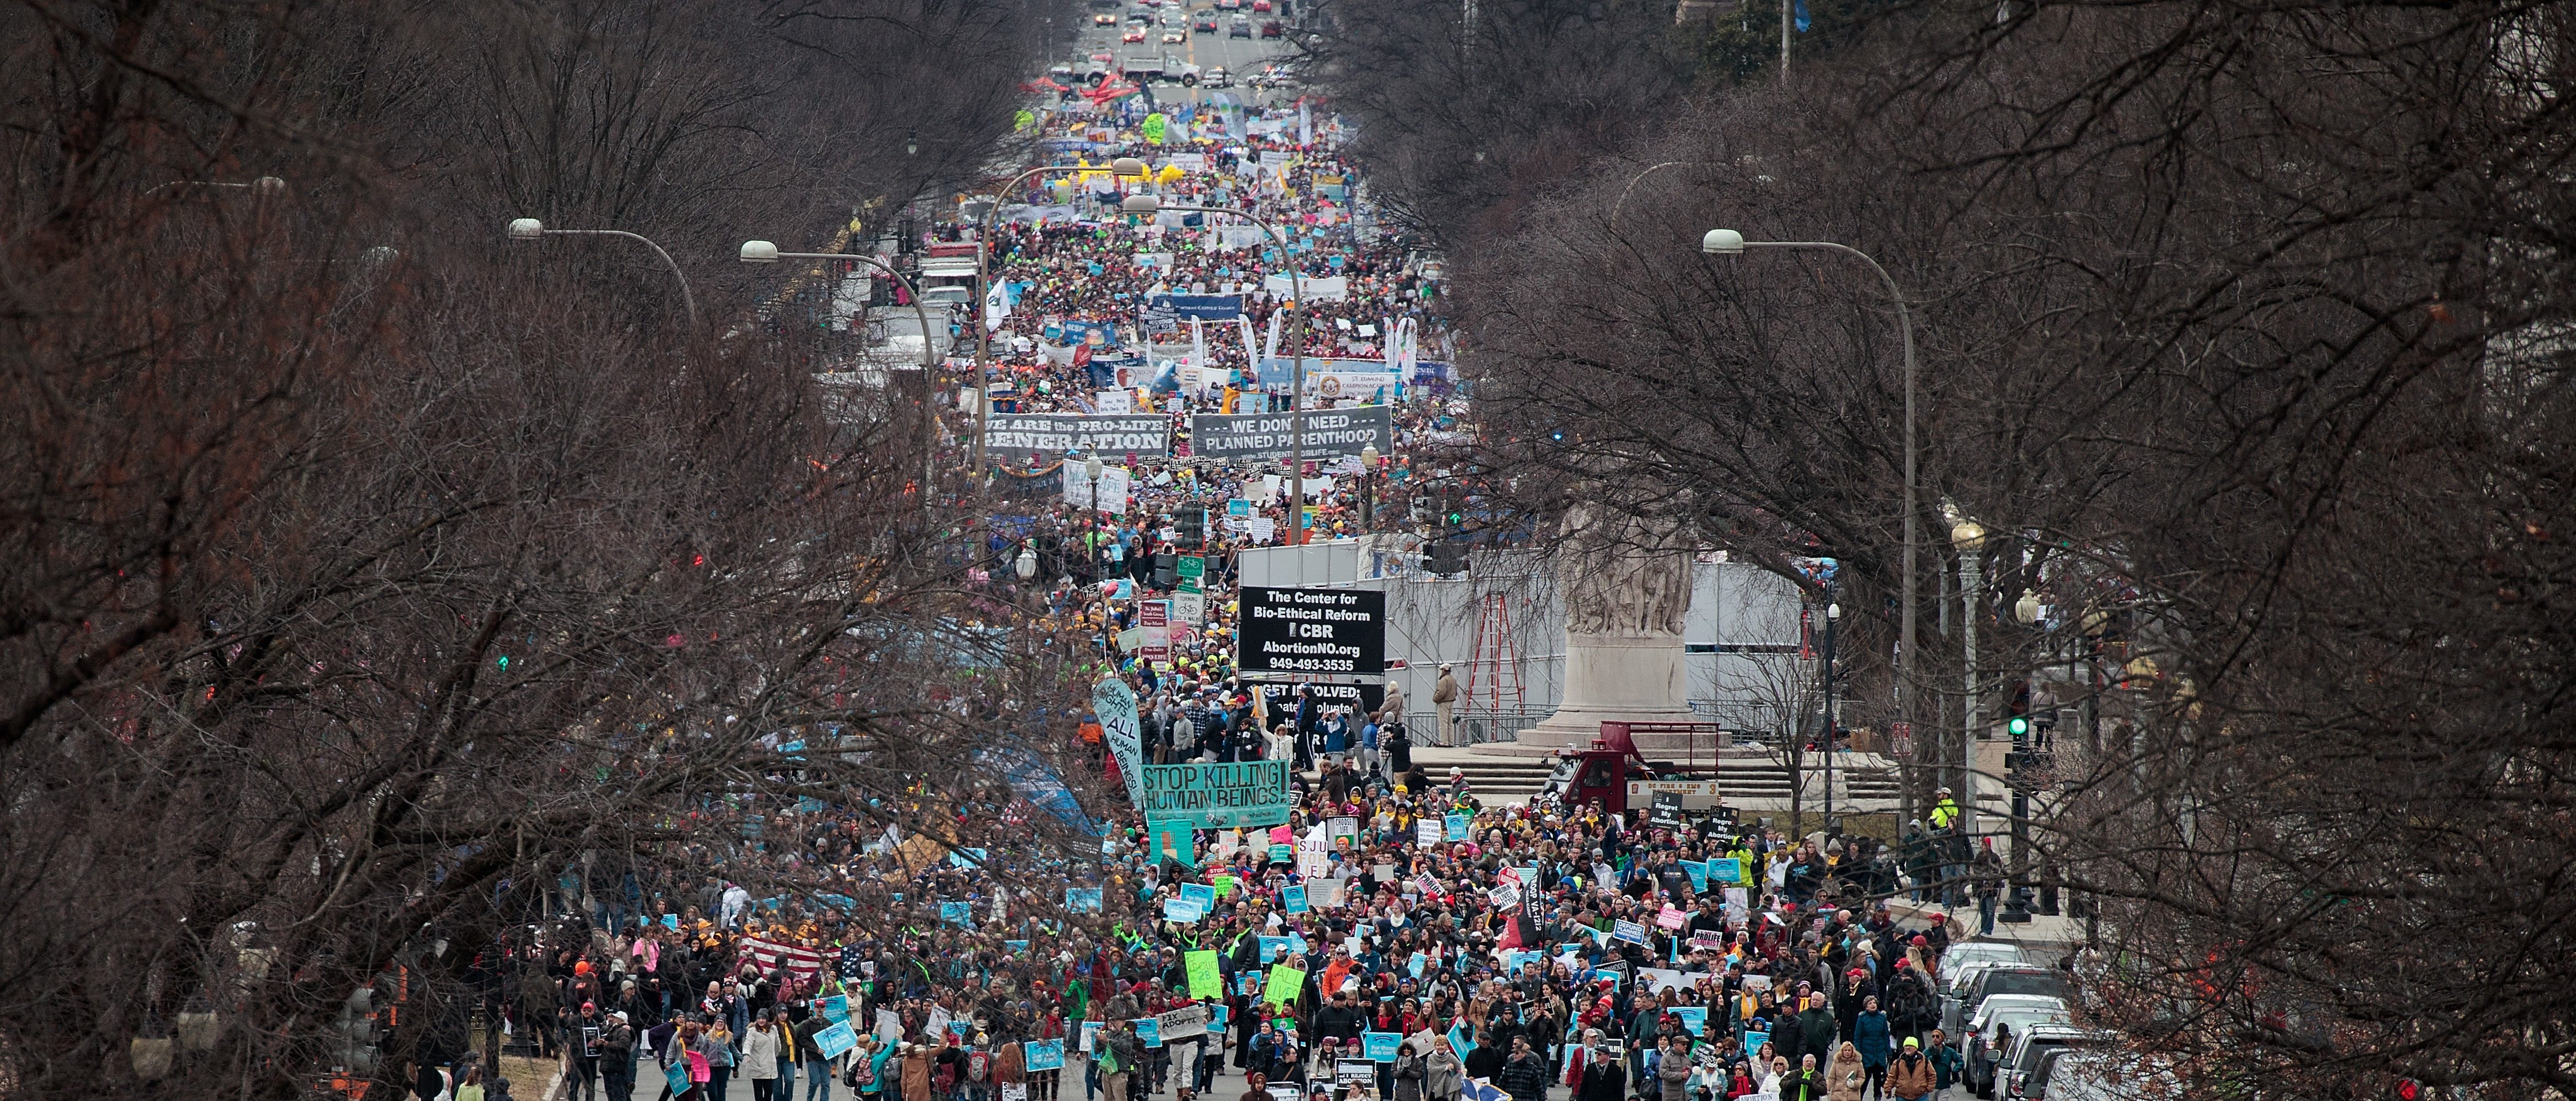 WASHINGTON, DC - JANUARY 27: Thousands of people march on Constitution Avenue during the March for Life, January 27, 2017 in Washington, DC. This year marks the 44th anniversary of the landmark Roe v. Wade Supreme Court case, which established a woman's constitutional right to an abortion. (Photo by Drew Angerer/Getty Images)